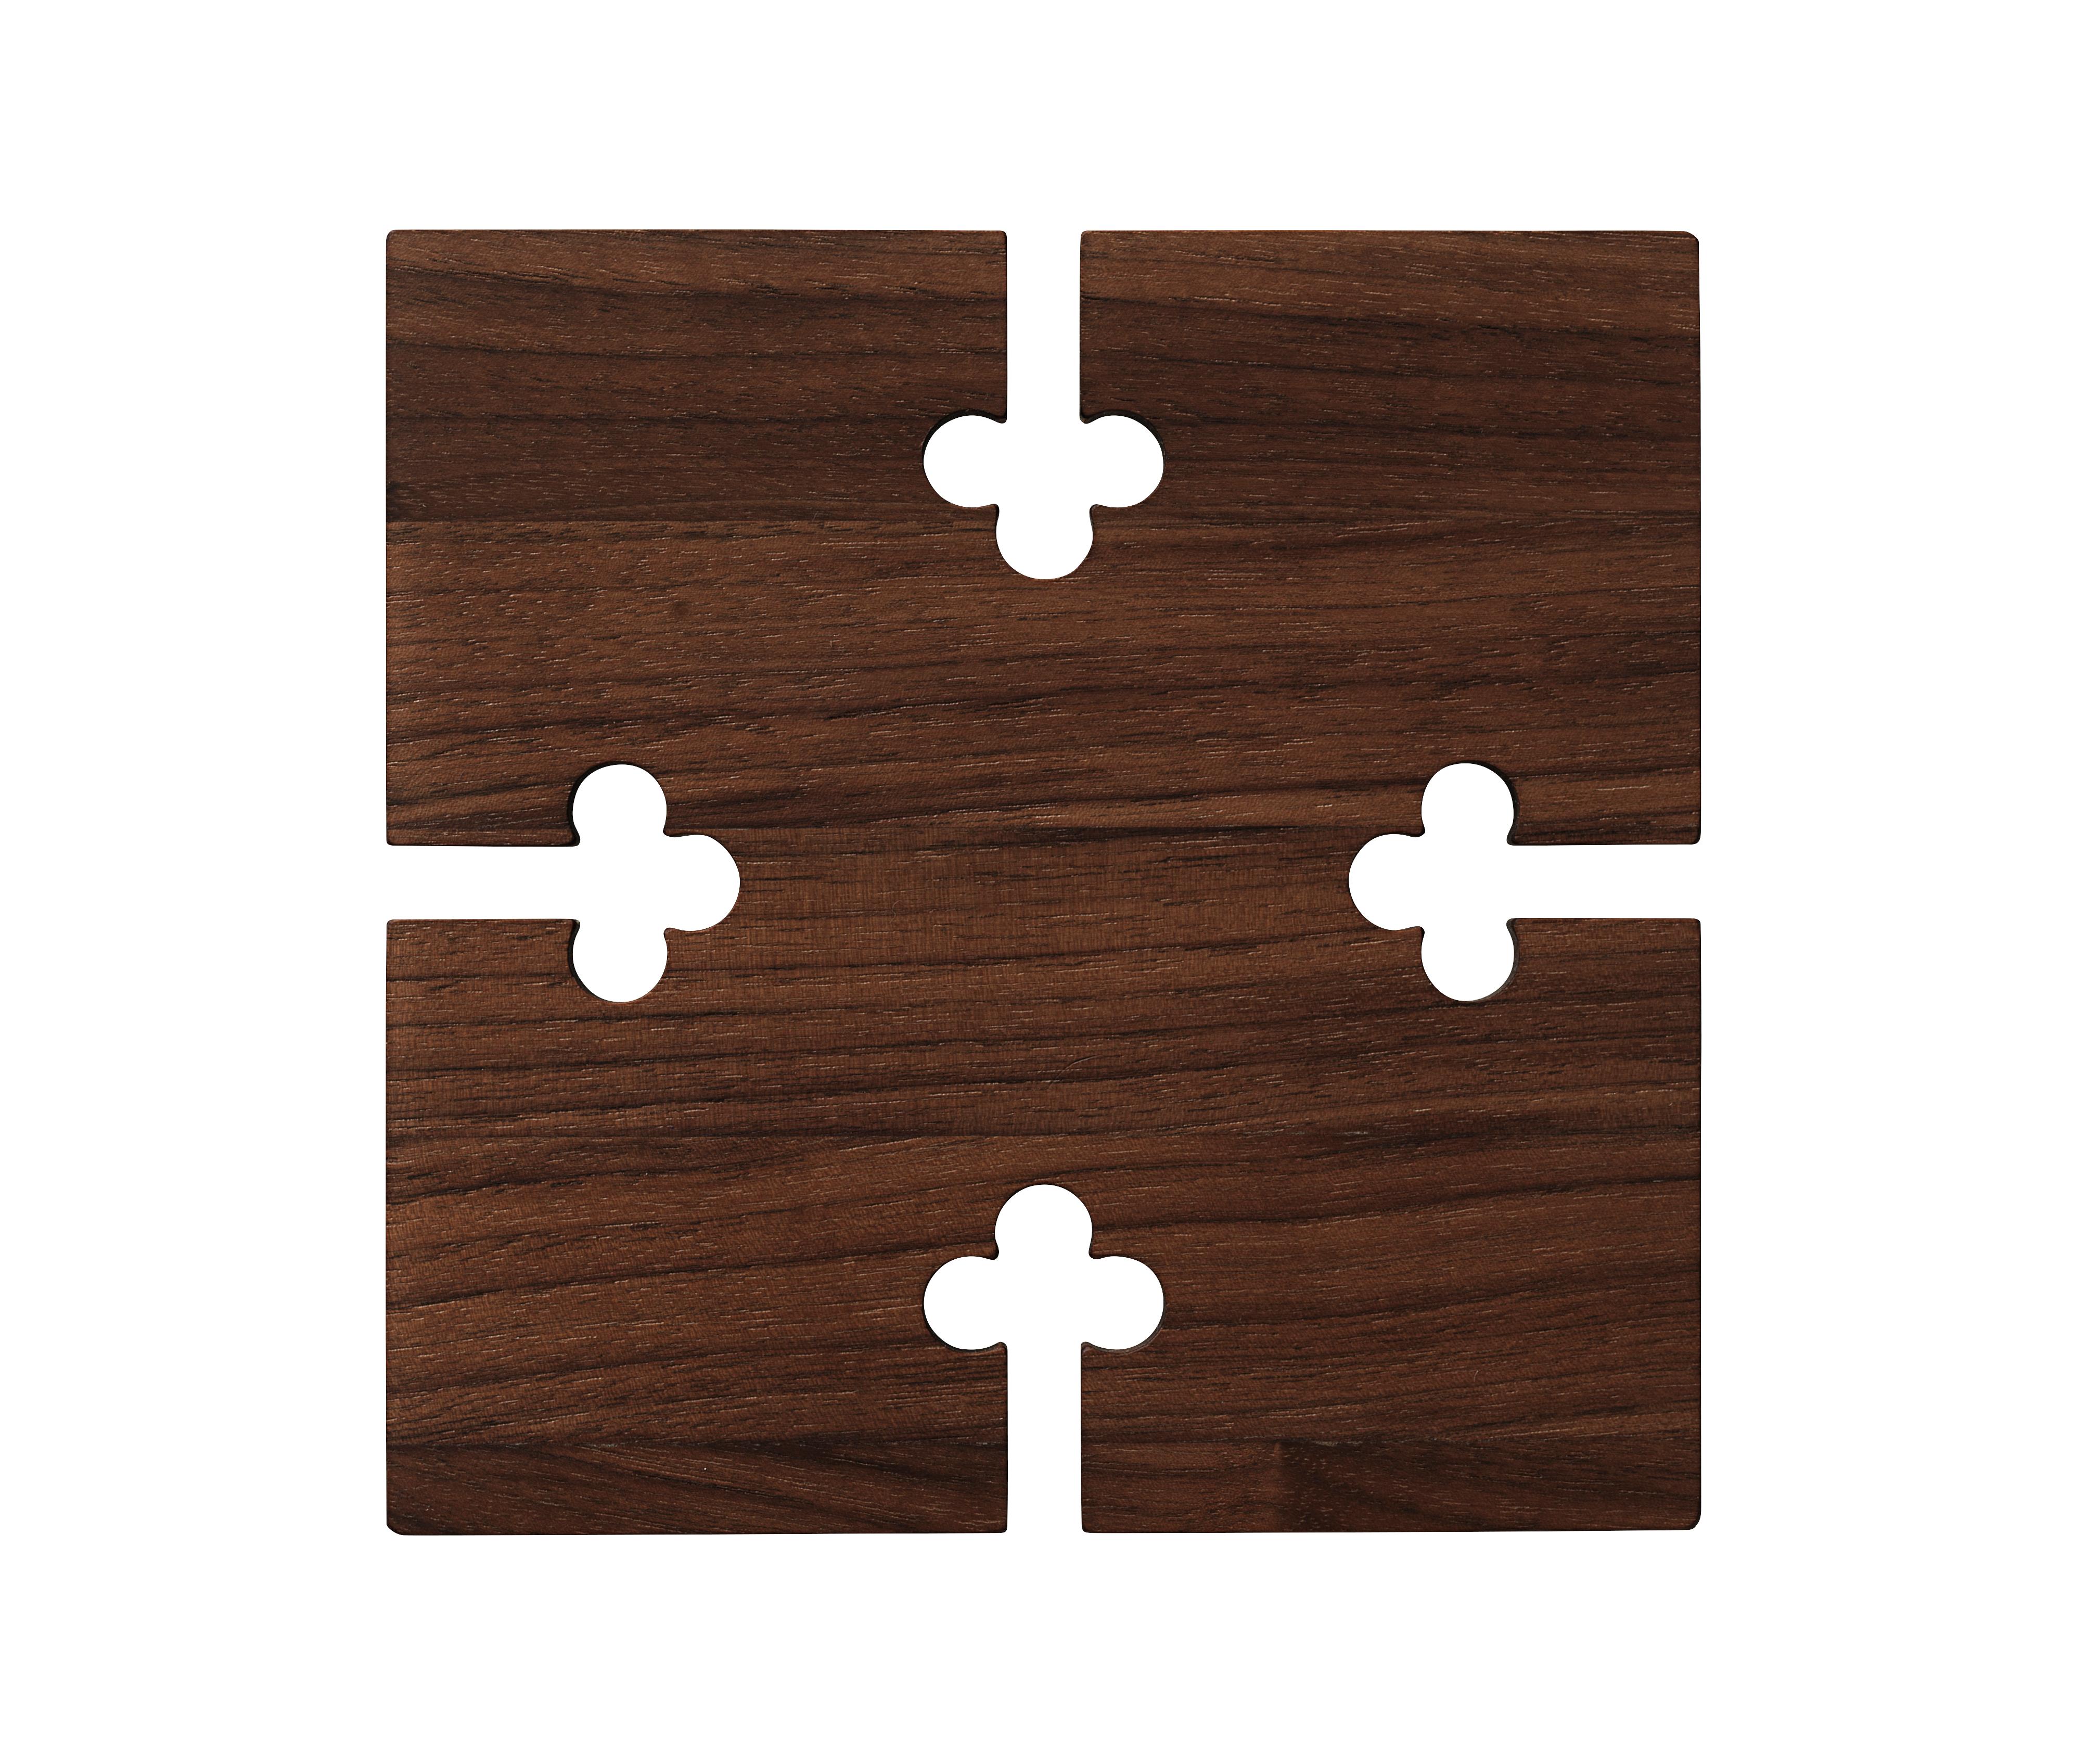 For Sale: Brown (Walnut) Gourmet Square Wood Trivet, by Gunnar Cyren from Warm Nordic